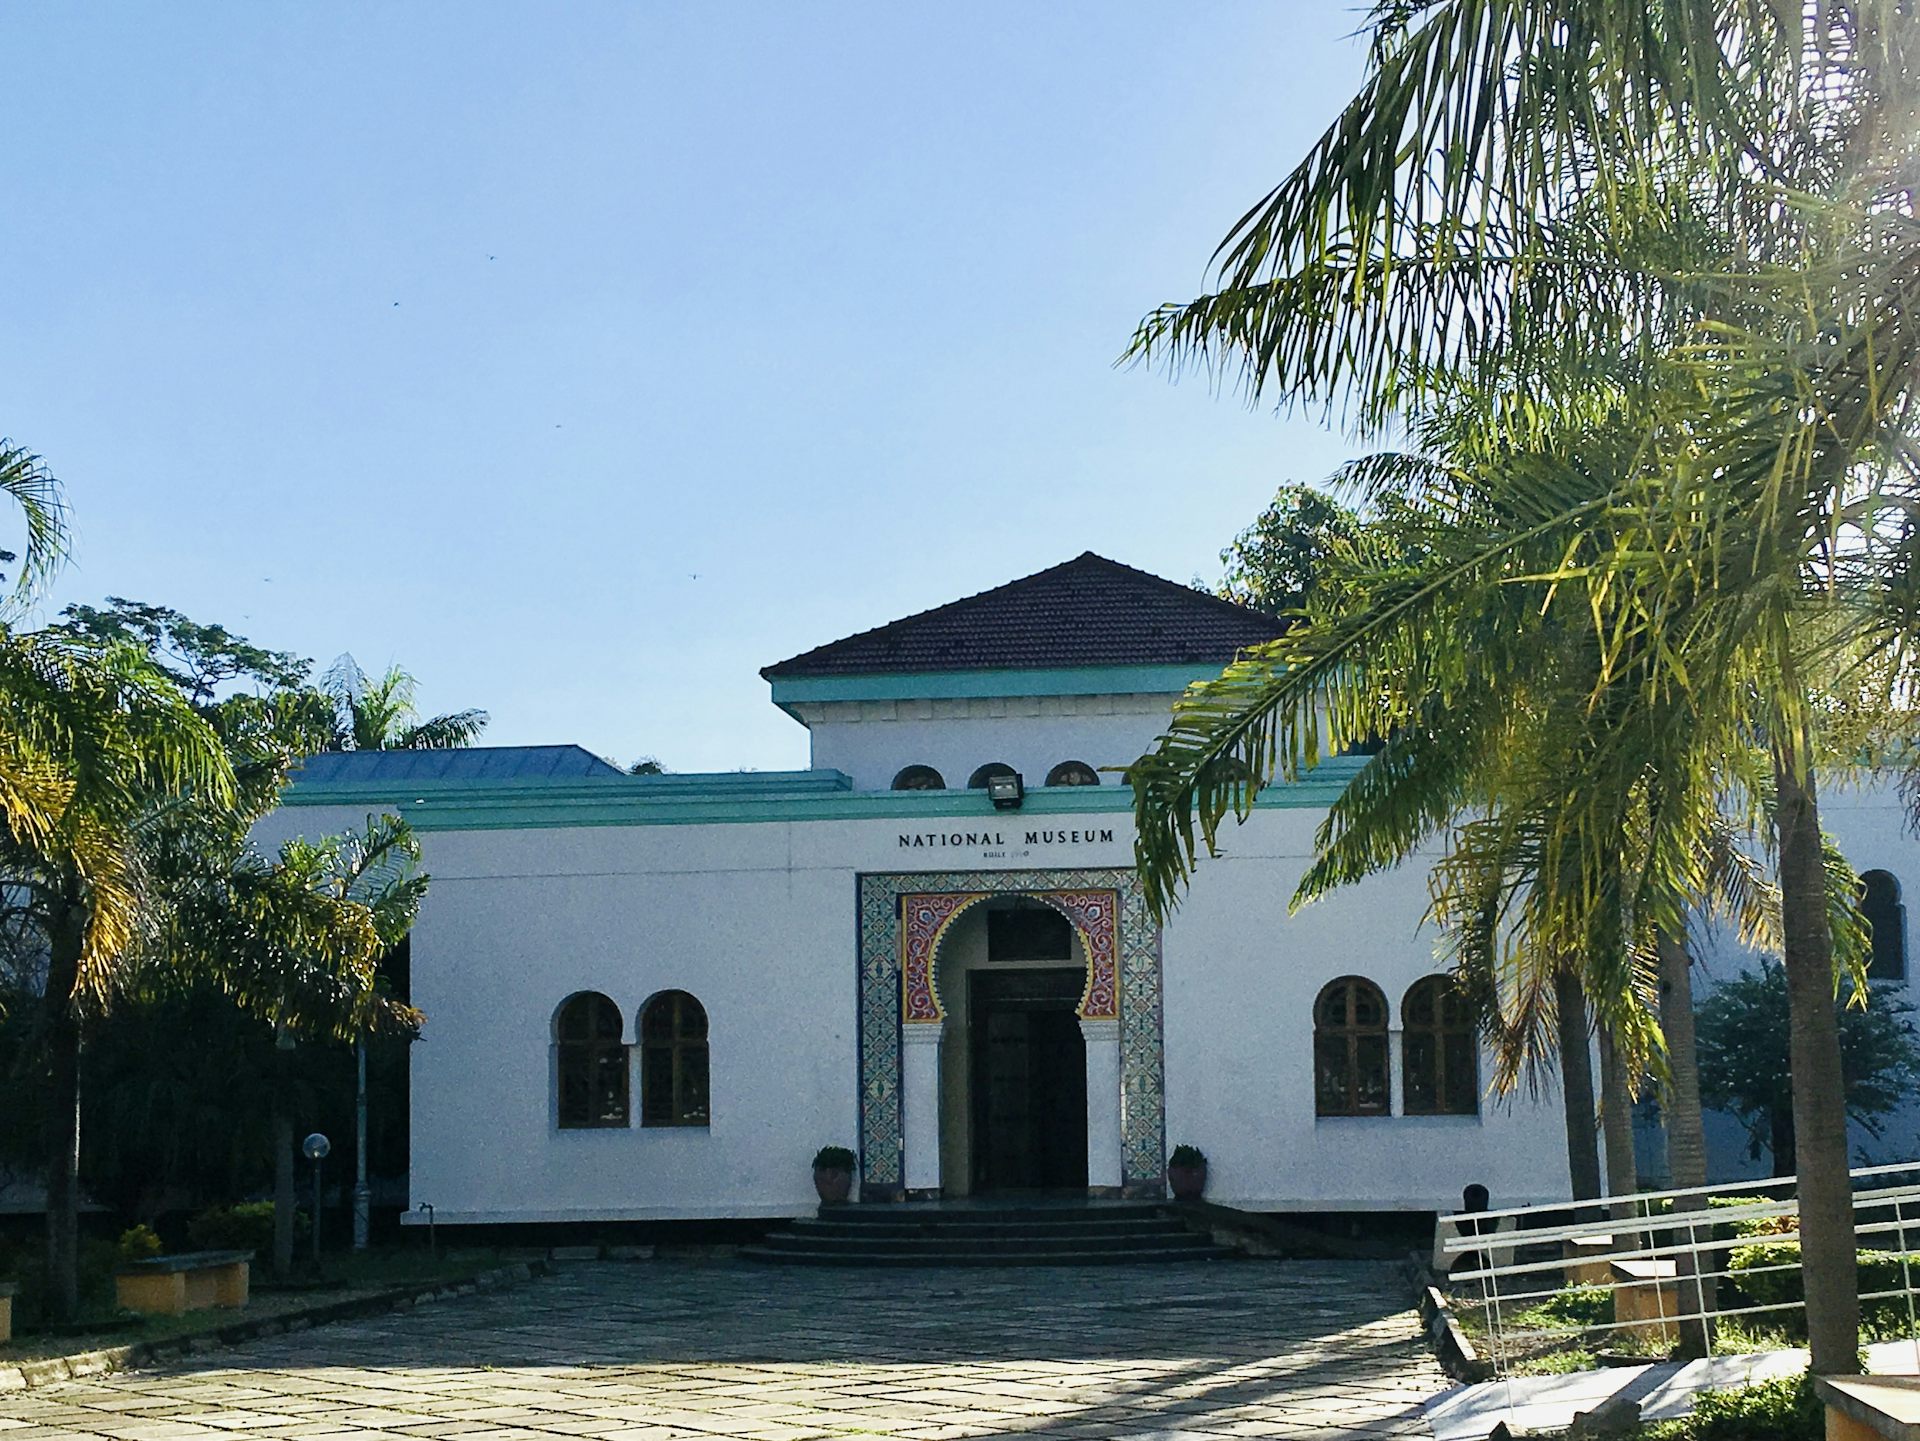 Museum building, palm trees